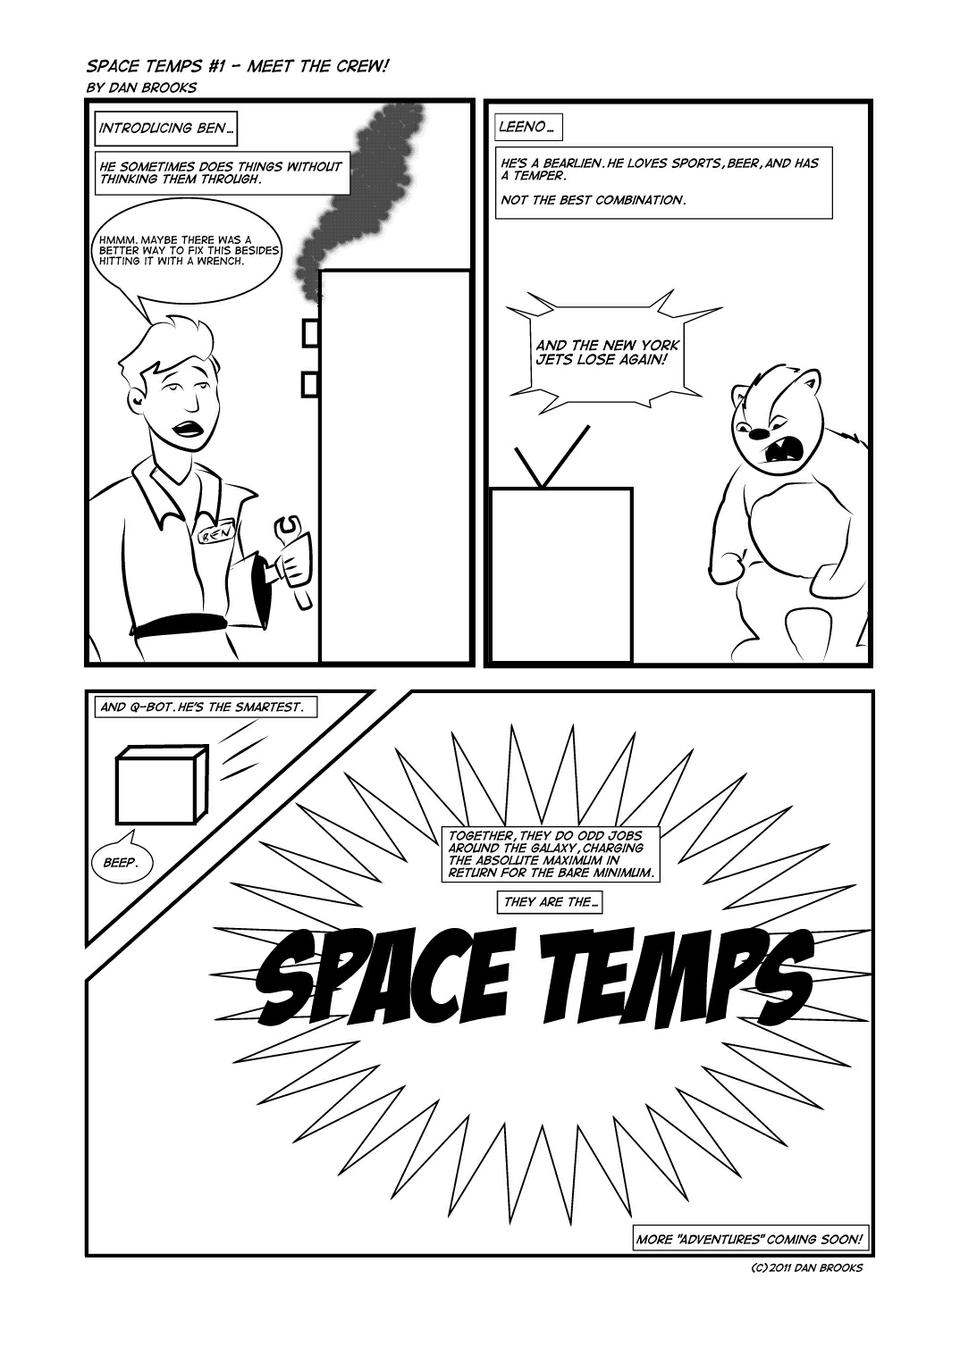 Space Temps #1 - Meet The Crew!